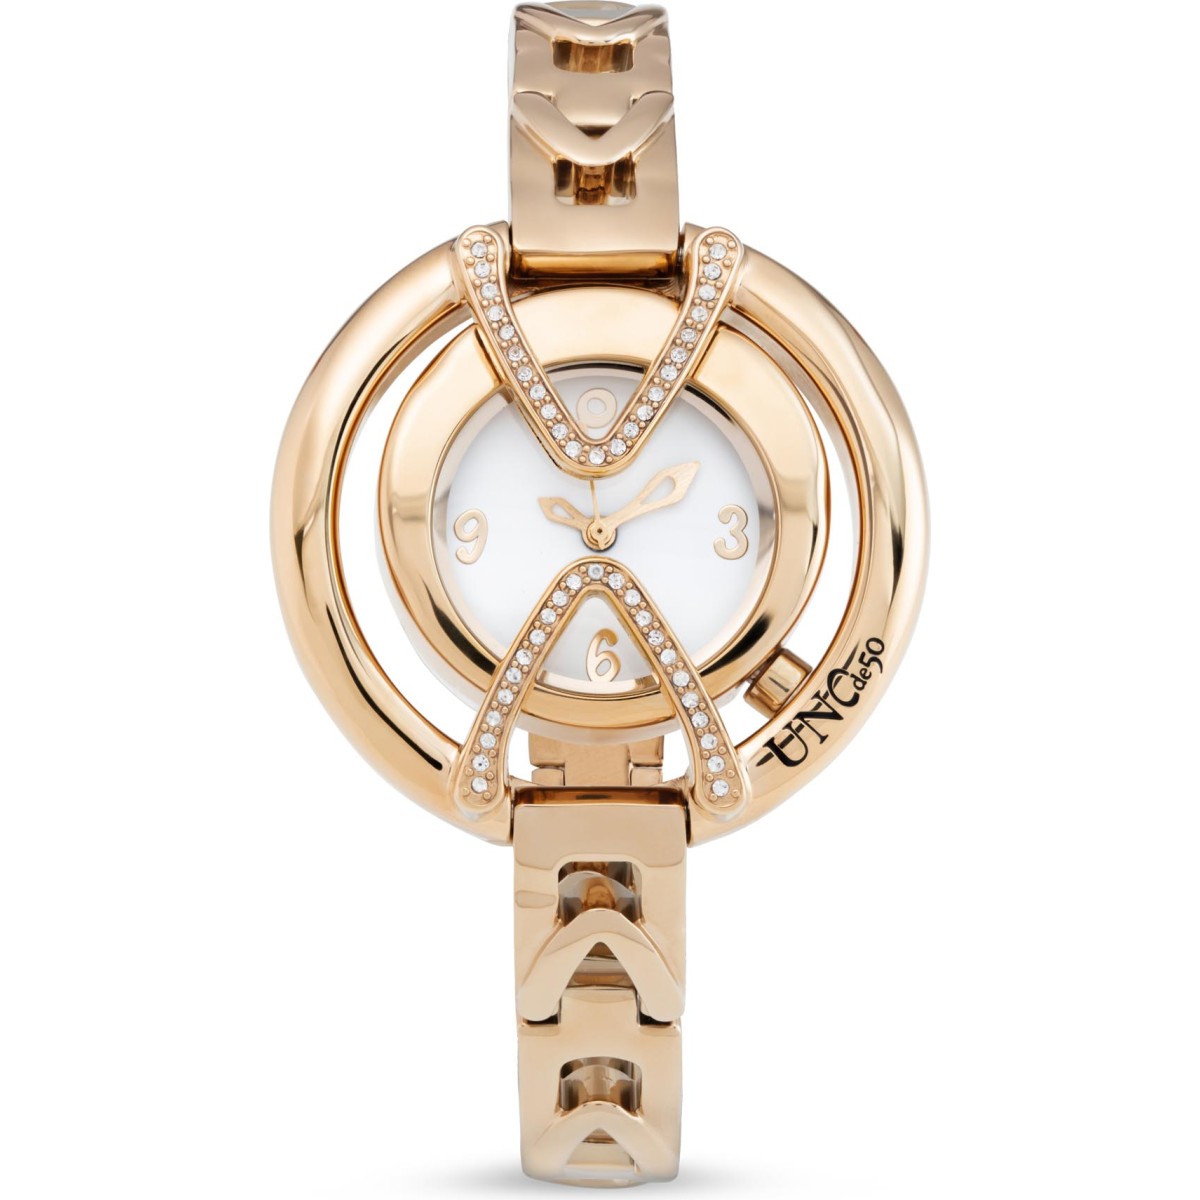 Reloj de mujer Stand out topaz UNOde50  REL0148BLNORO0L